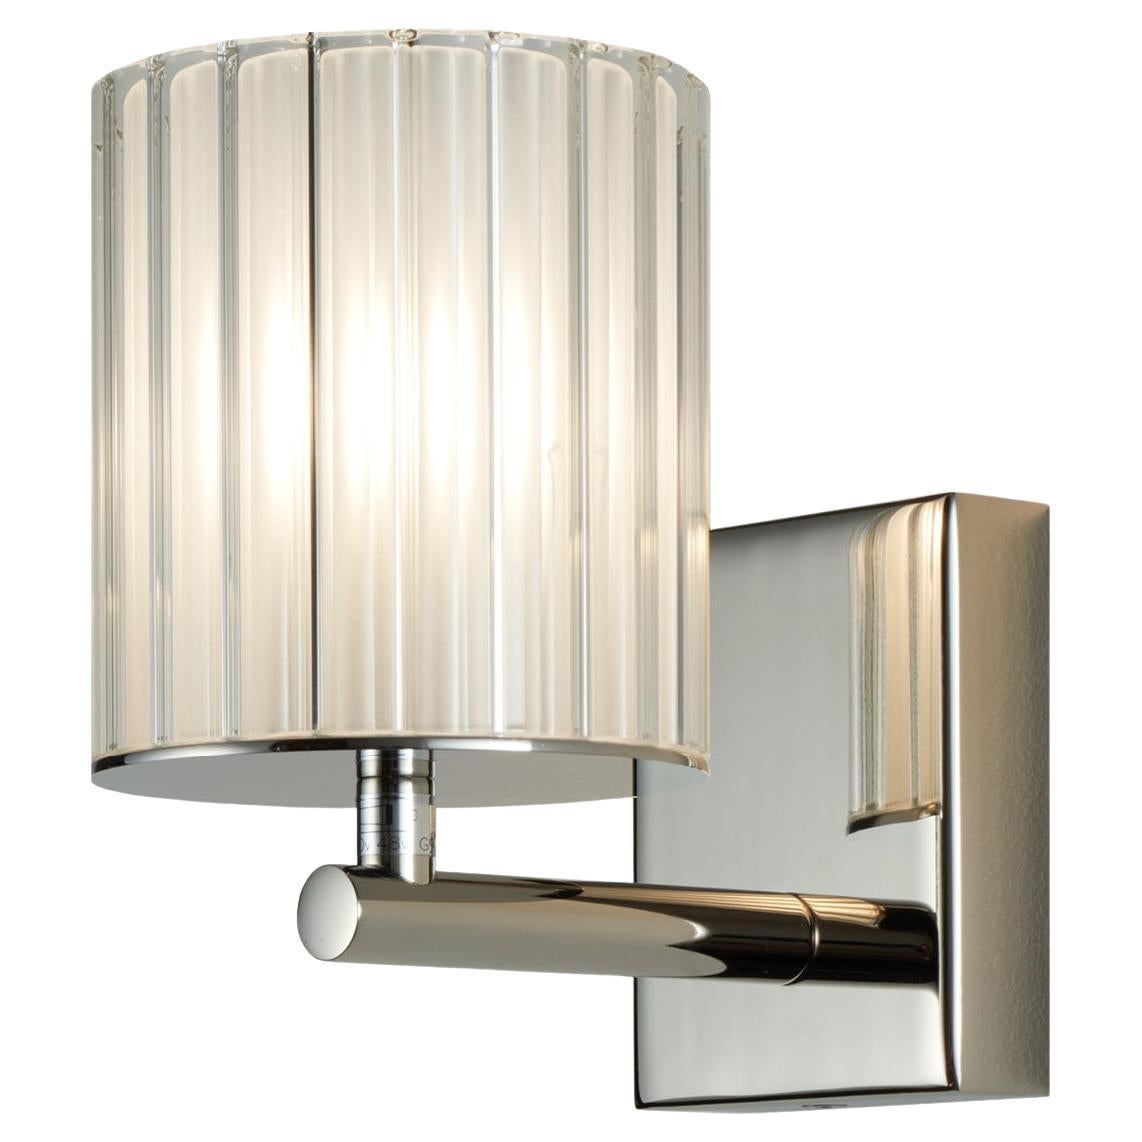 Flute Wall Light in Polished Nickel with Frosted Glass Diffuser, UL Listed For Sale